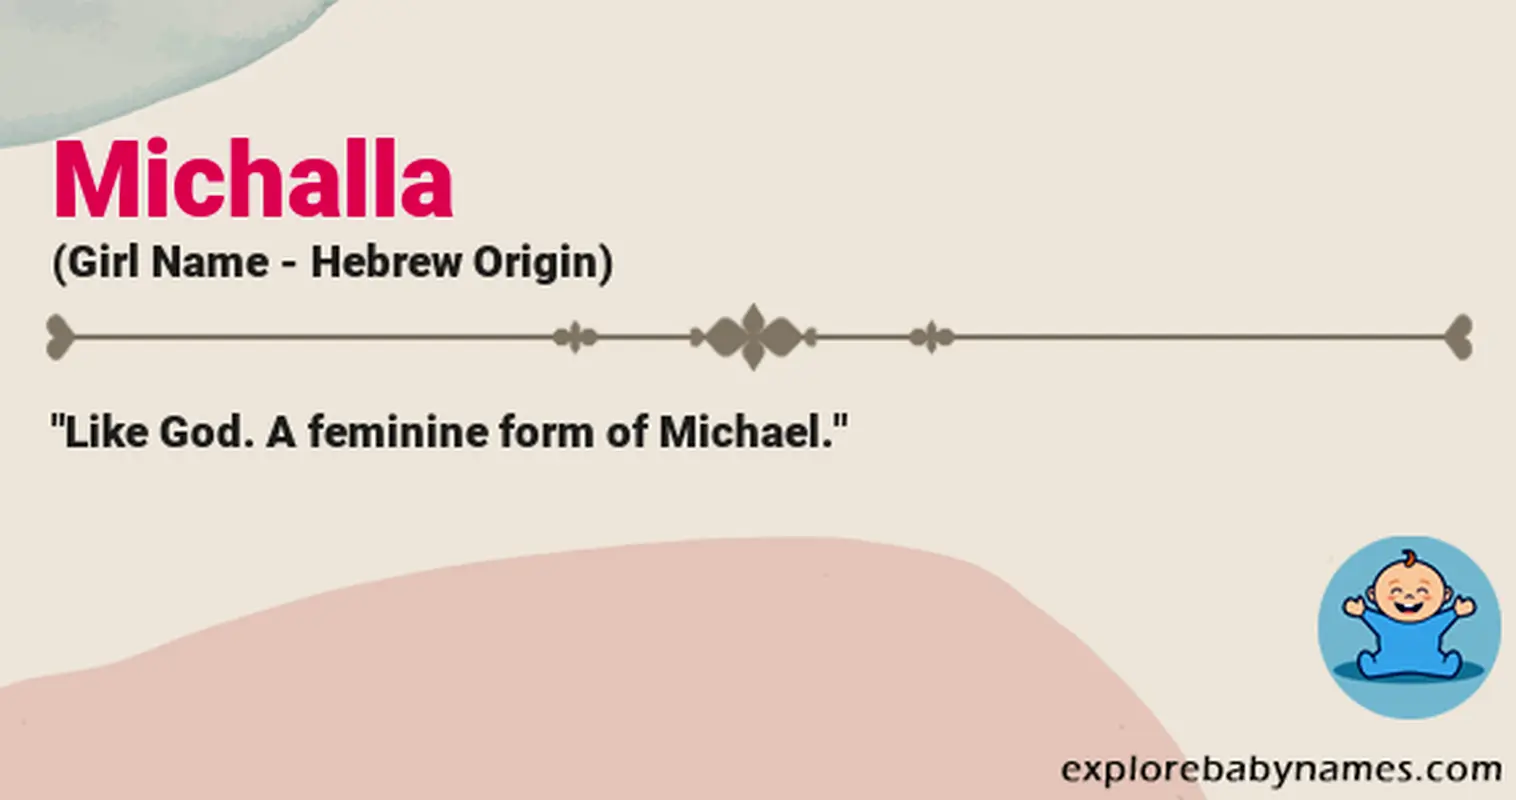 Meaning of Michalla